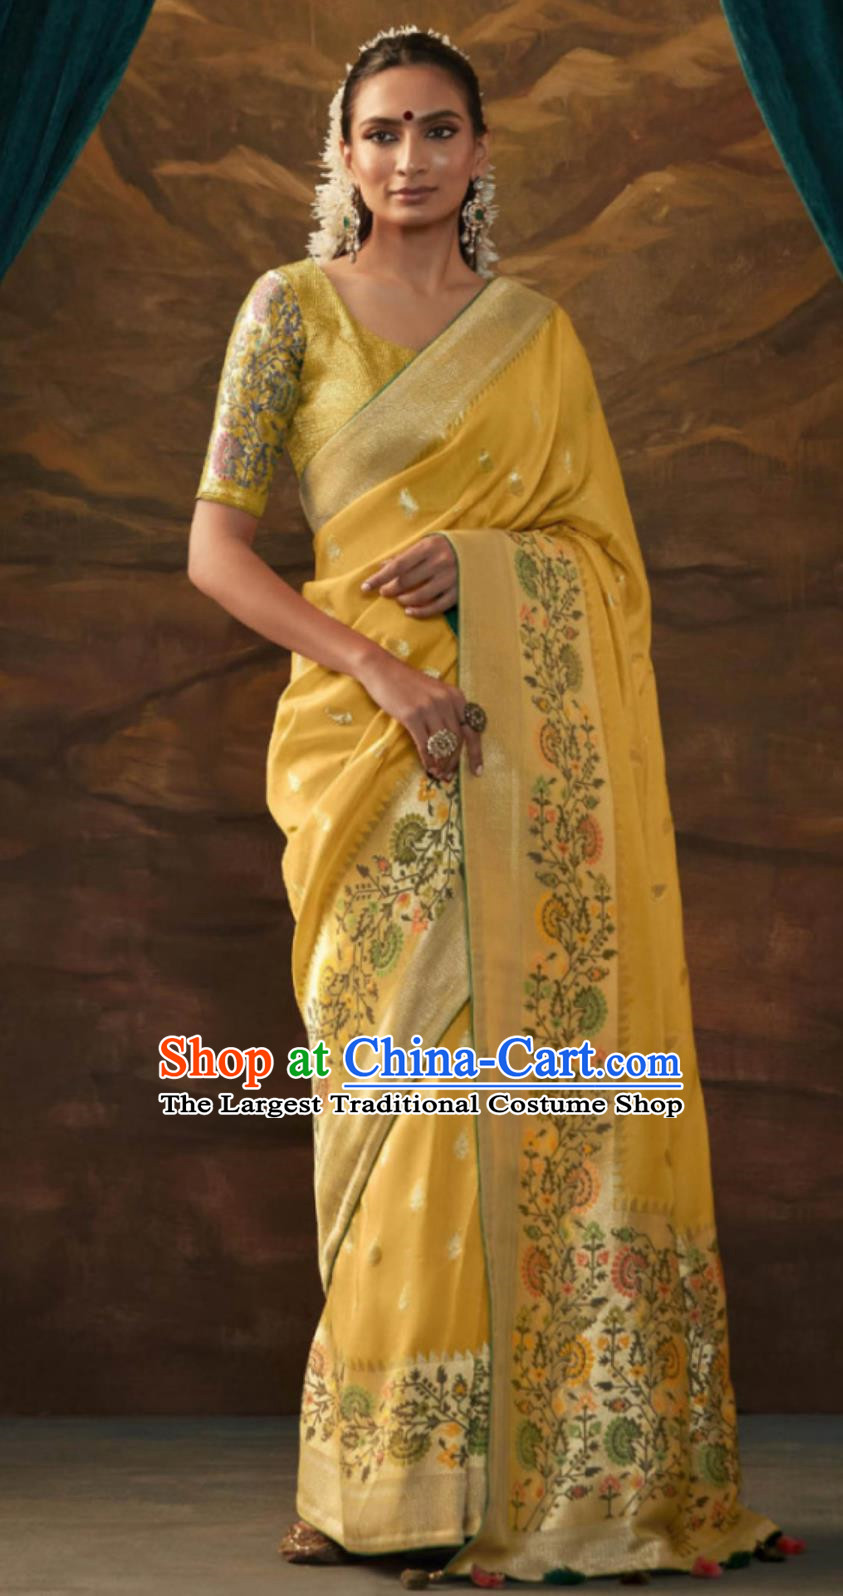 India National Clothing Traditional Festival Noble Lady Yellow Sari Dress Indian Brahmans Woman Costume